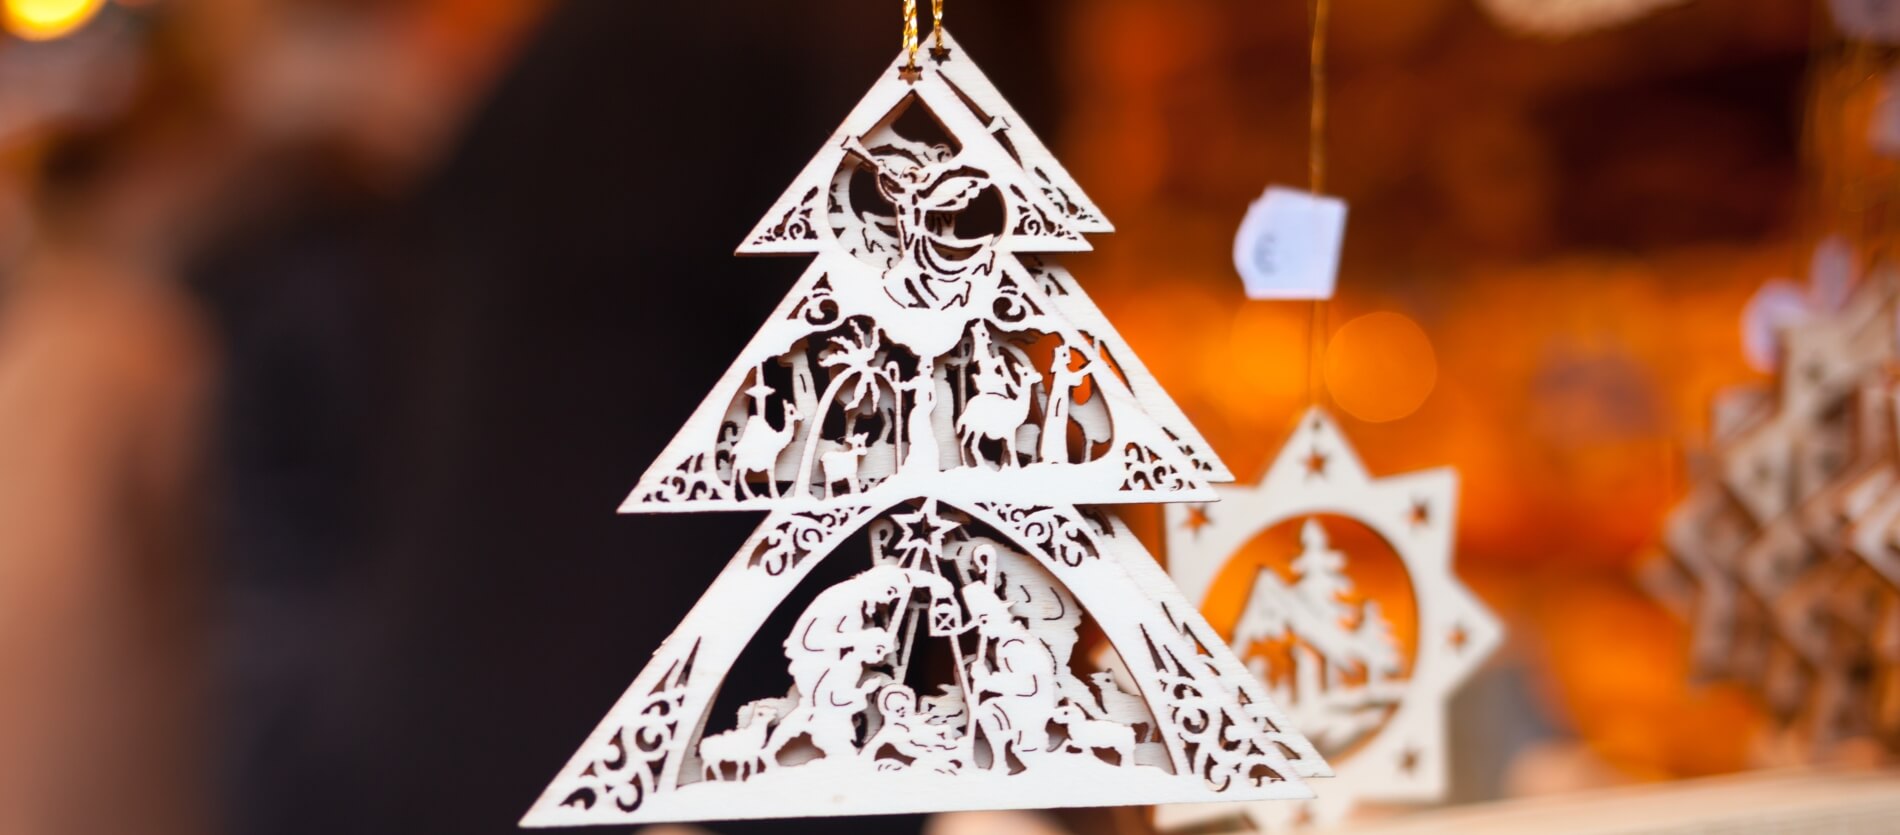 Wooden Christmas tree decorations which have been painted white